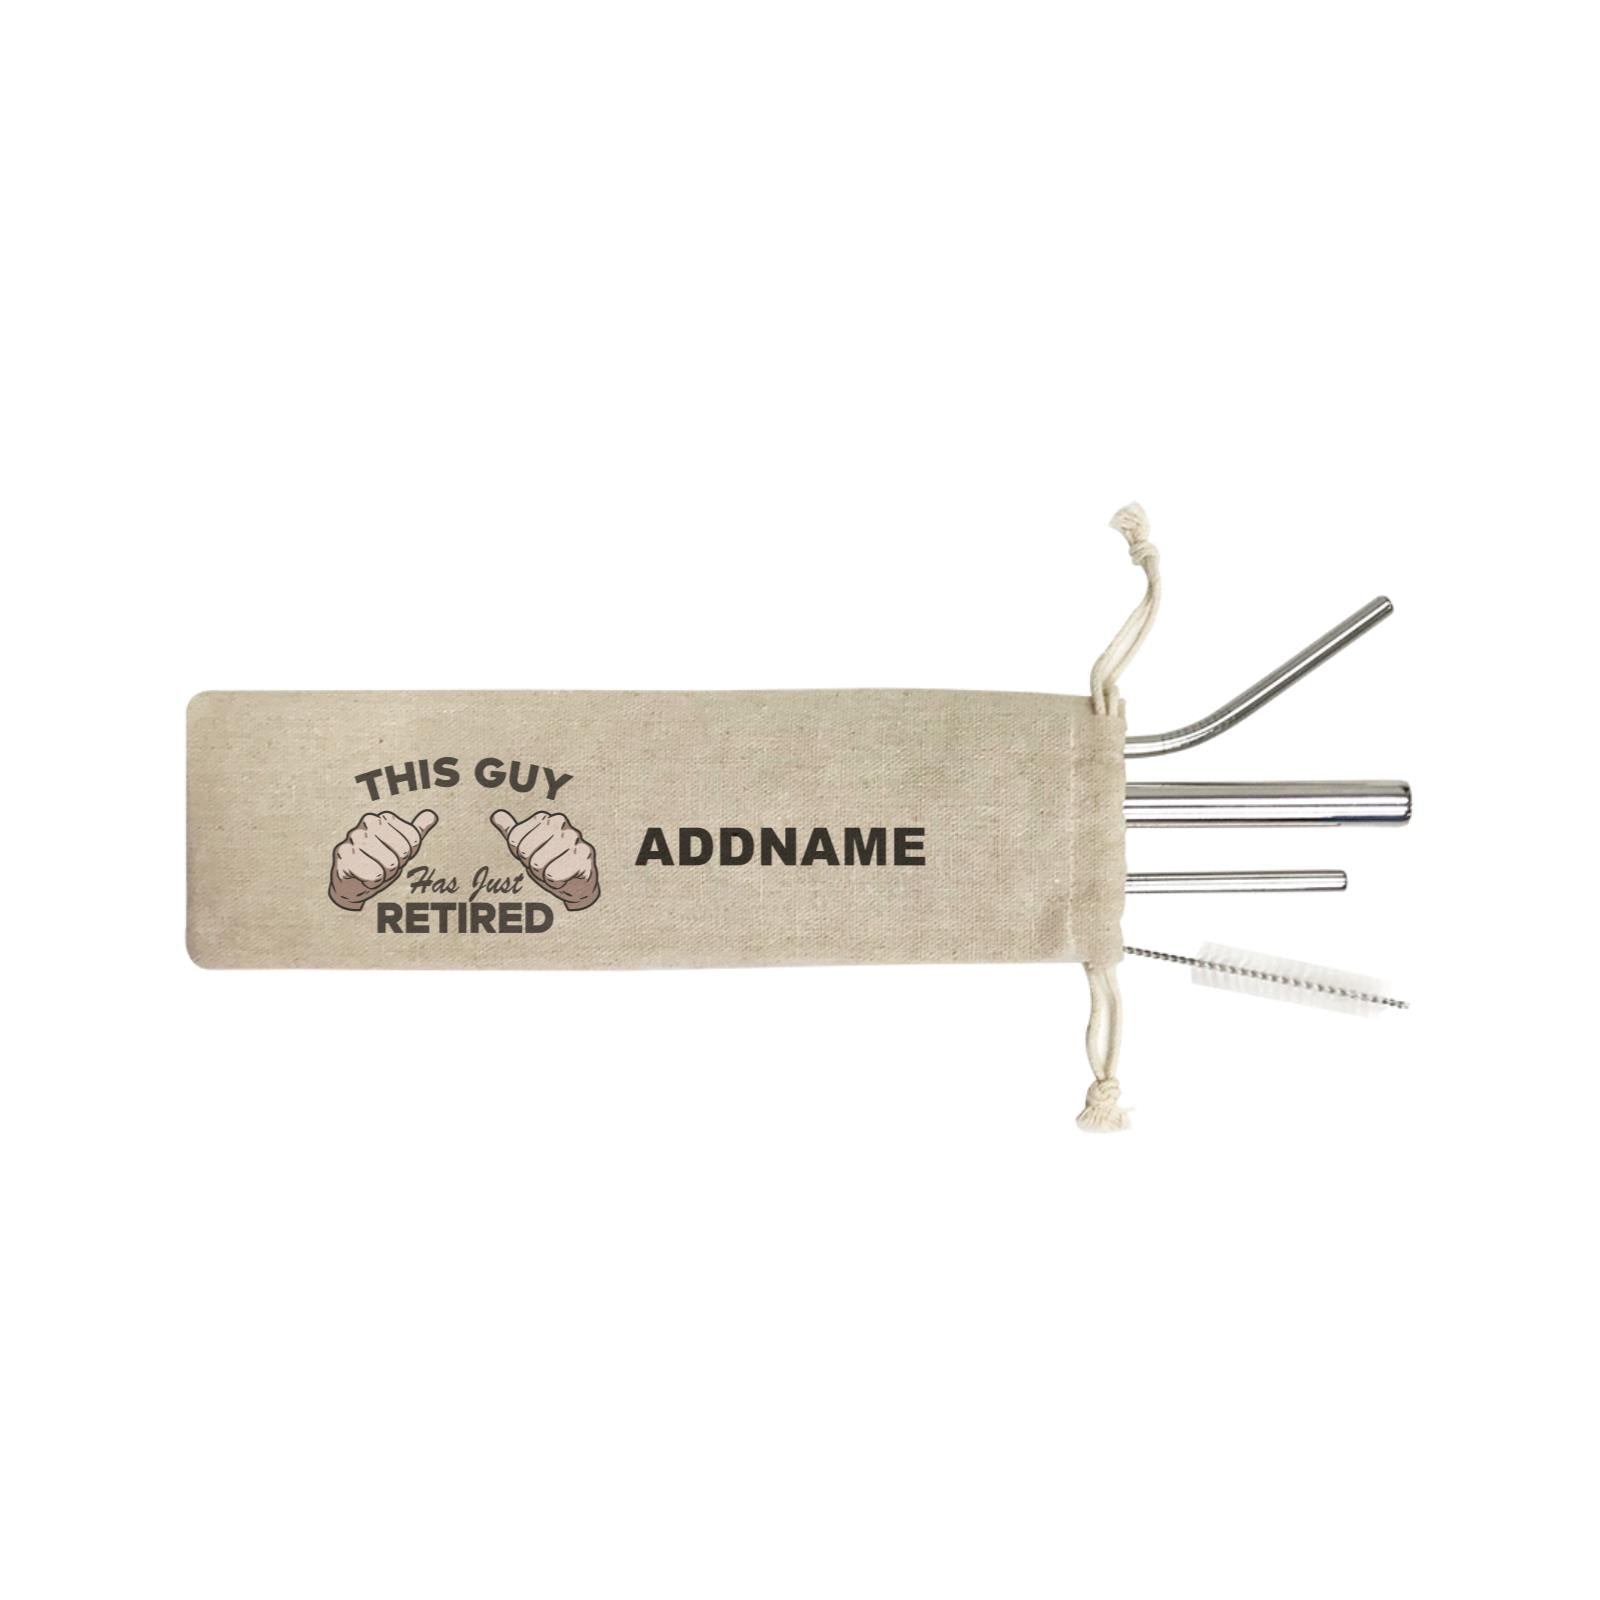 This Guy Has Just Retired Addname SB 4-In-1 Stainless Steel Straw Set in Satchel